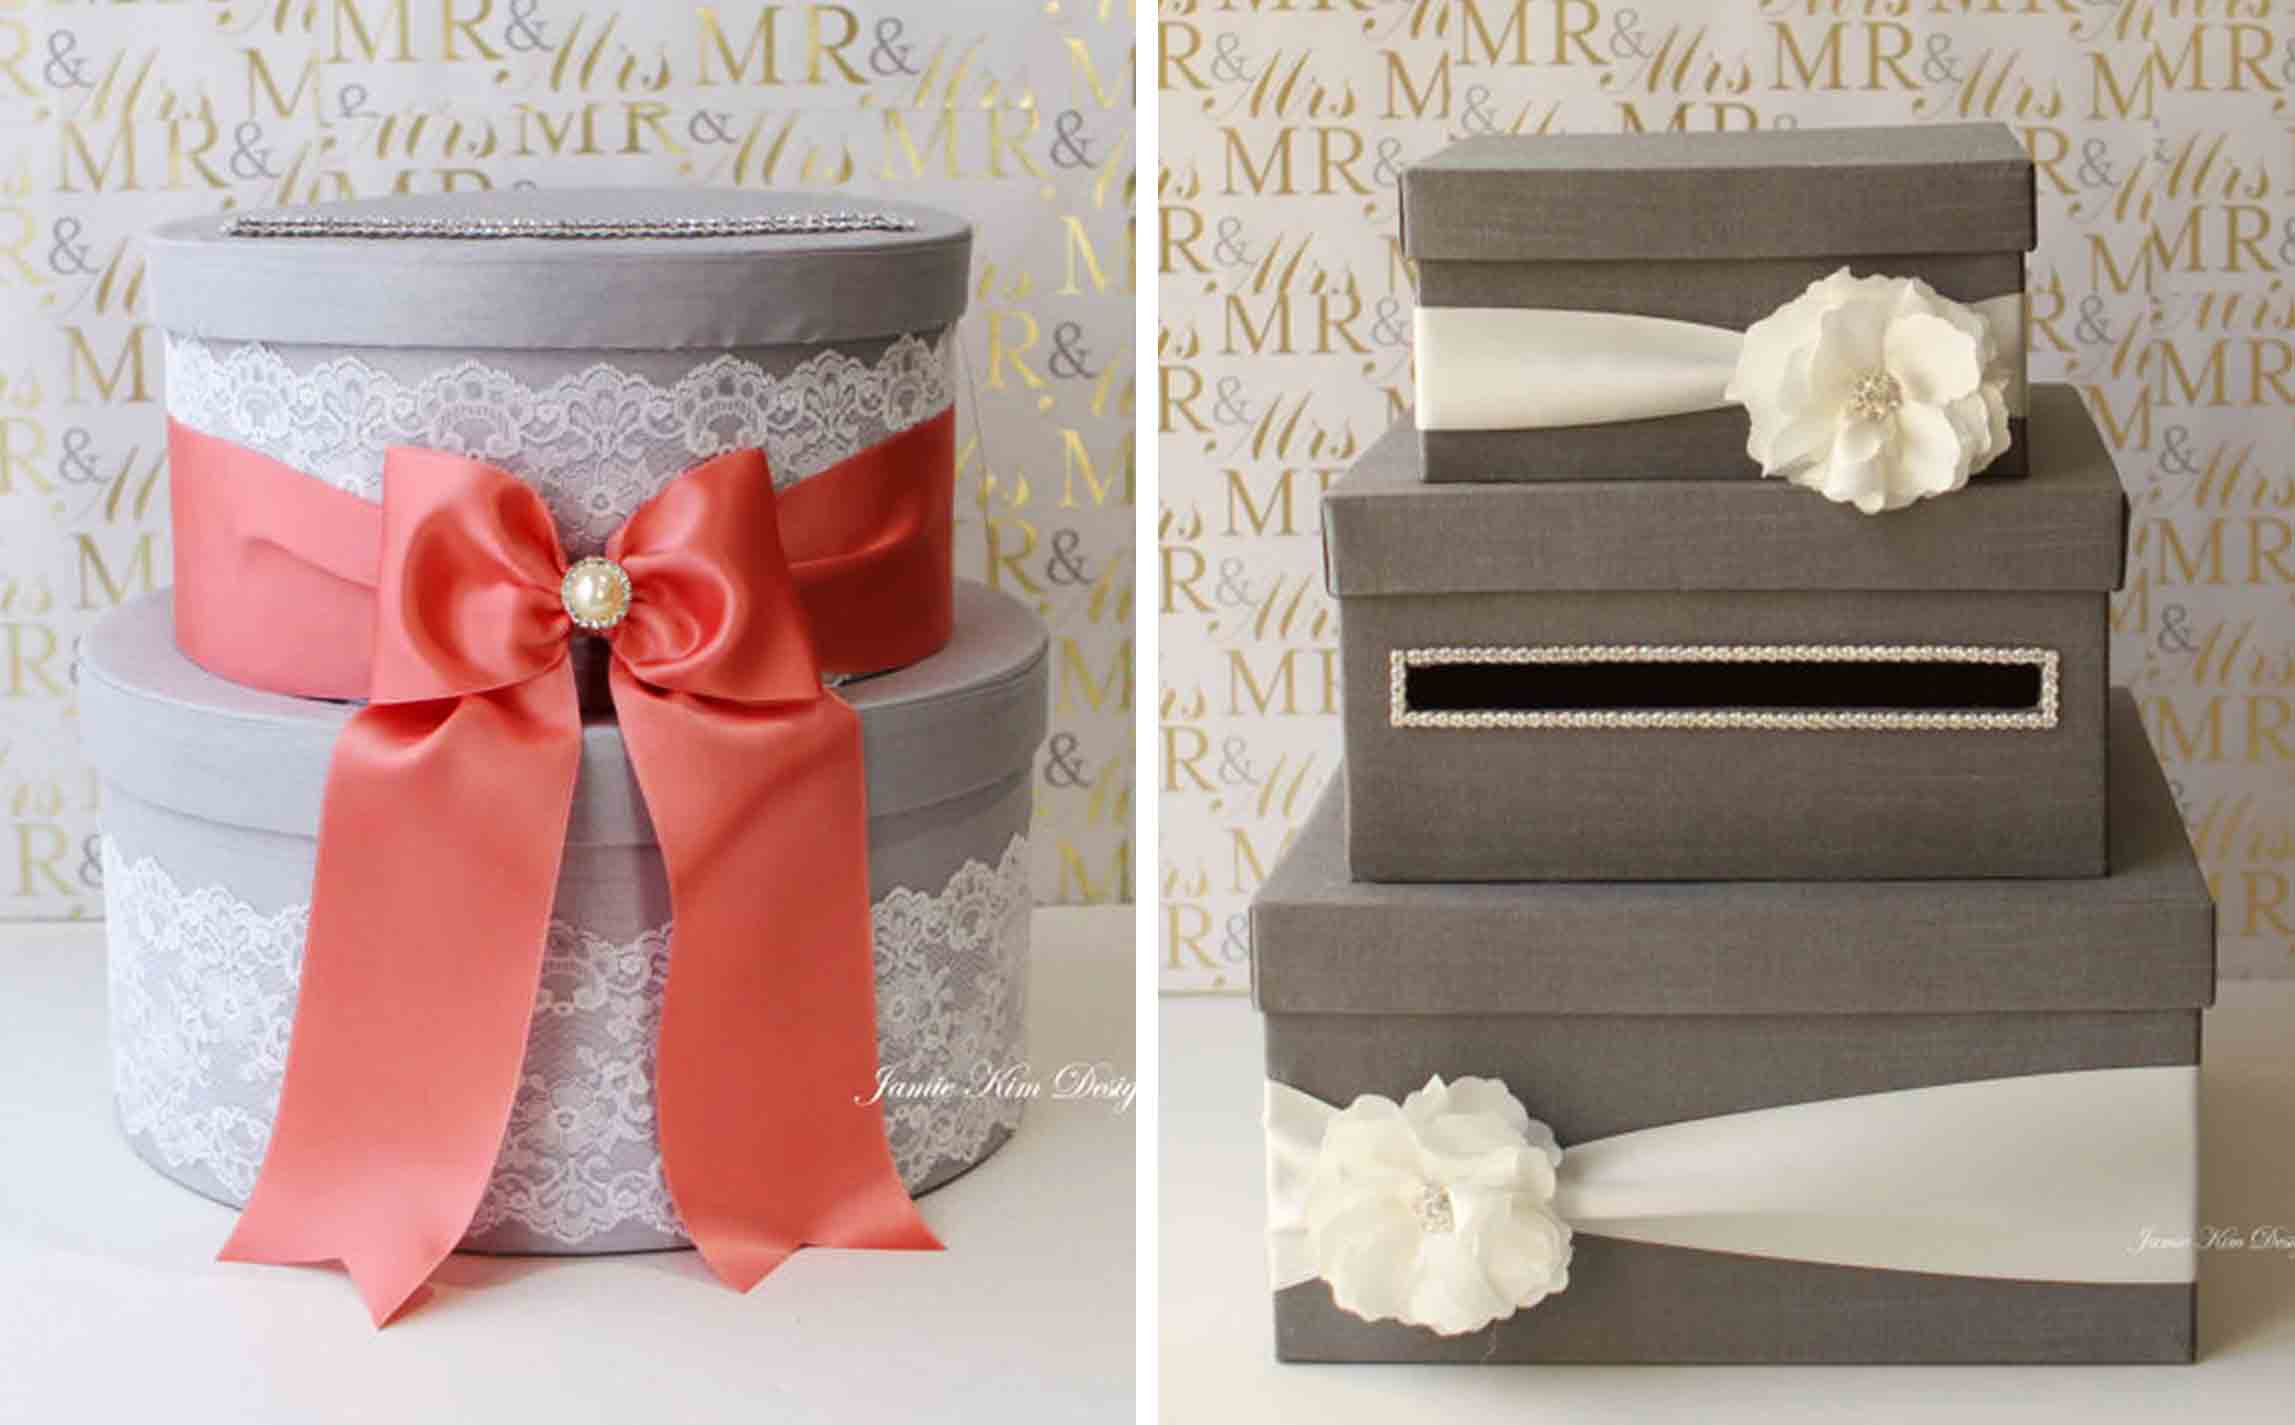 DIY Card Box For Wedding
 18 DIY Wedding Card Boxes For Your Guests To Slip Your